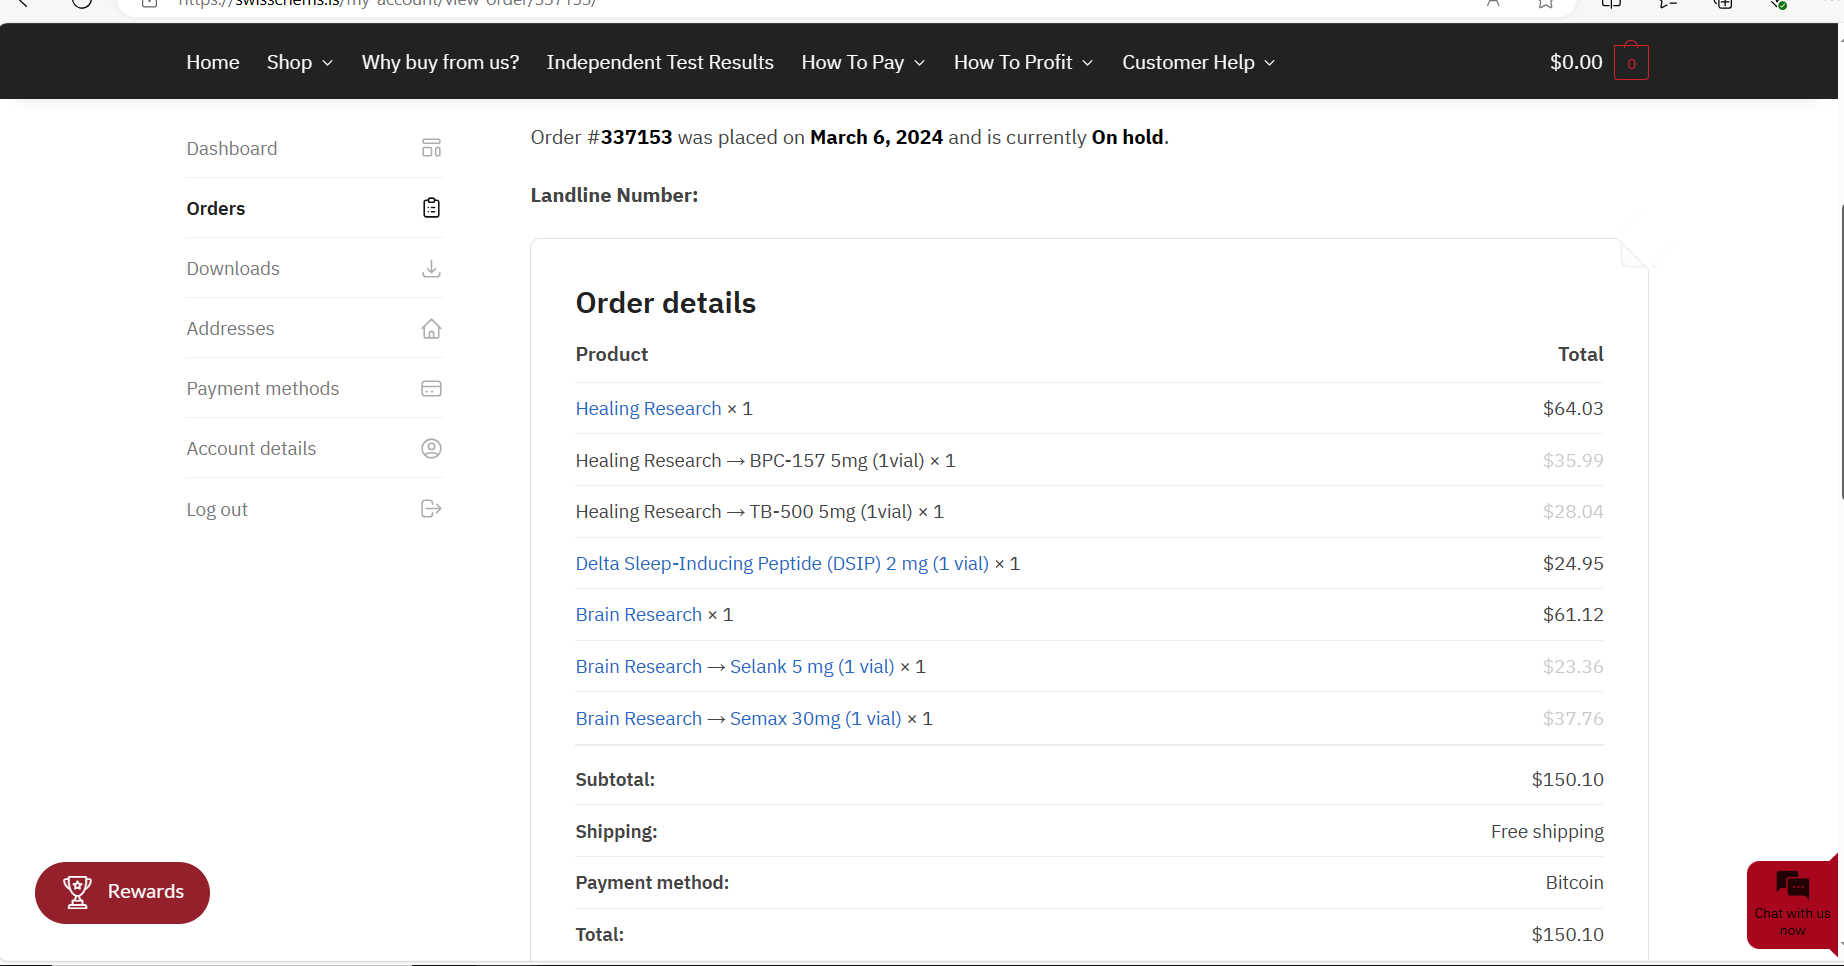 SCREENSHOT, SHOWS ORDER IS NOW ON HOLD